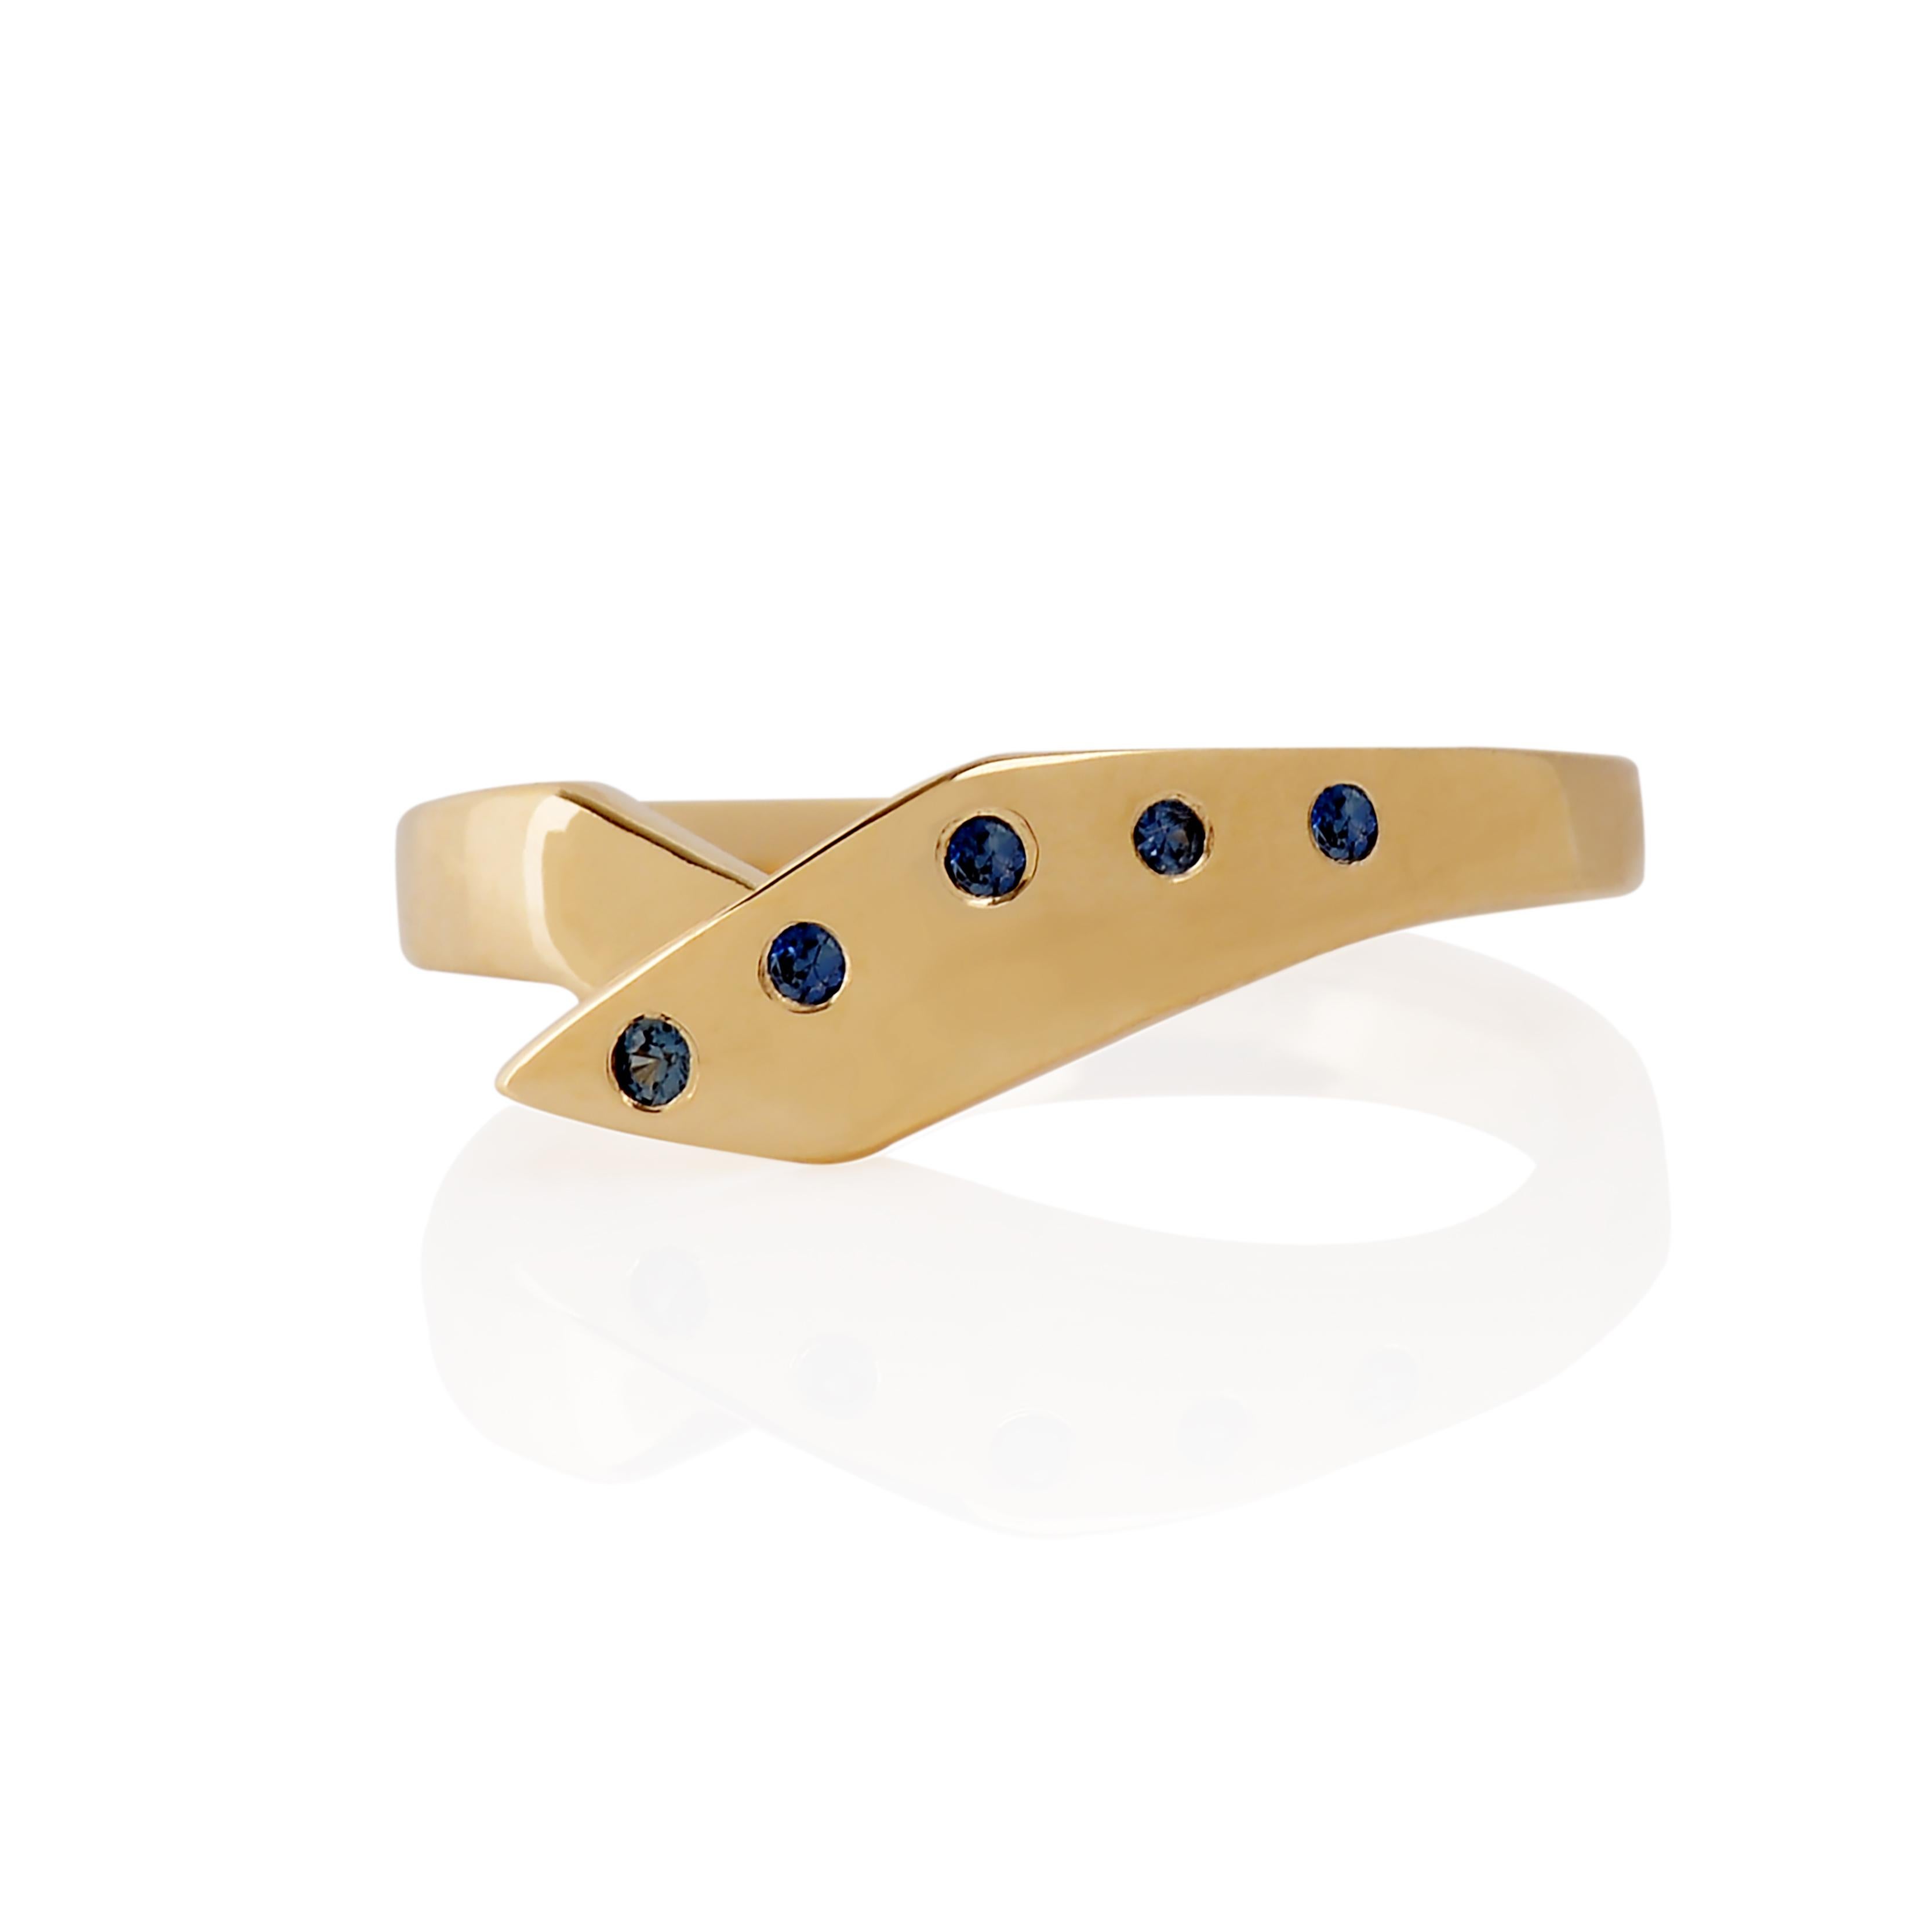 Round Cut Susan Crow Studio Yellow Gold and Montana Yogo Sapphire Chafee Ring For Sale